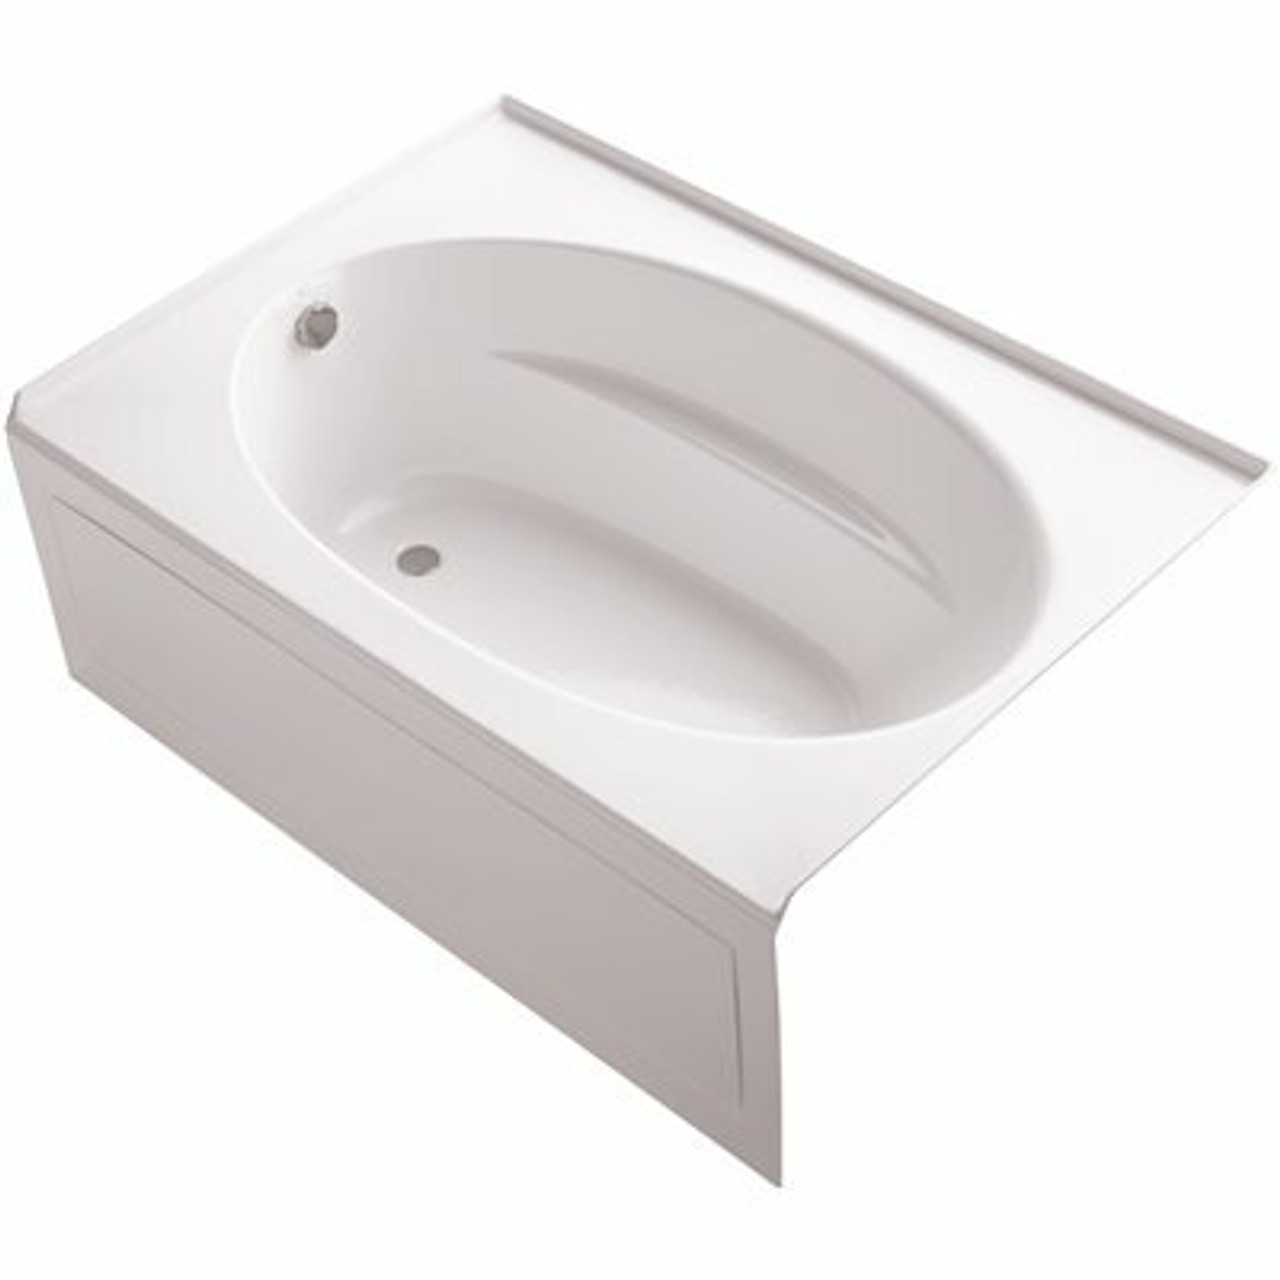 Kohler Windward 60 In. X 42 In. Acrylic Alcove Bathtub With Integral Apron And Left-Hand Drain In White